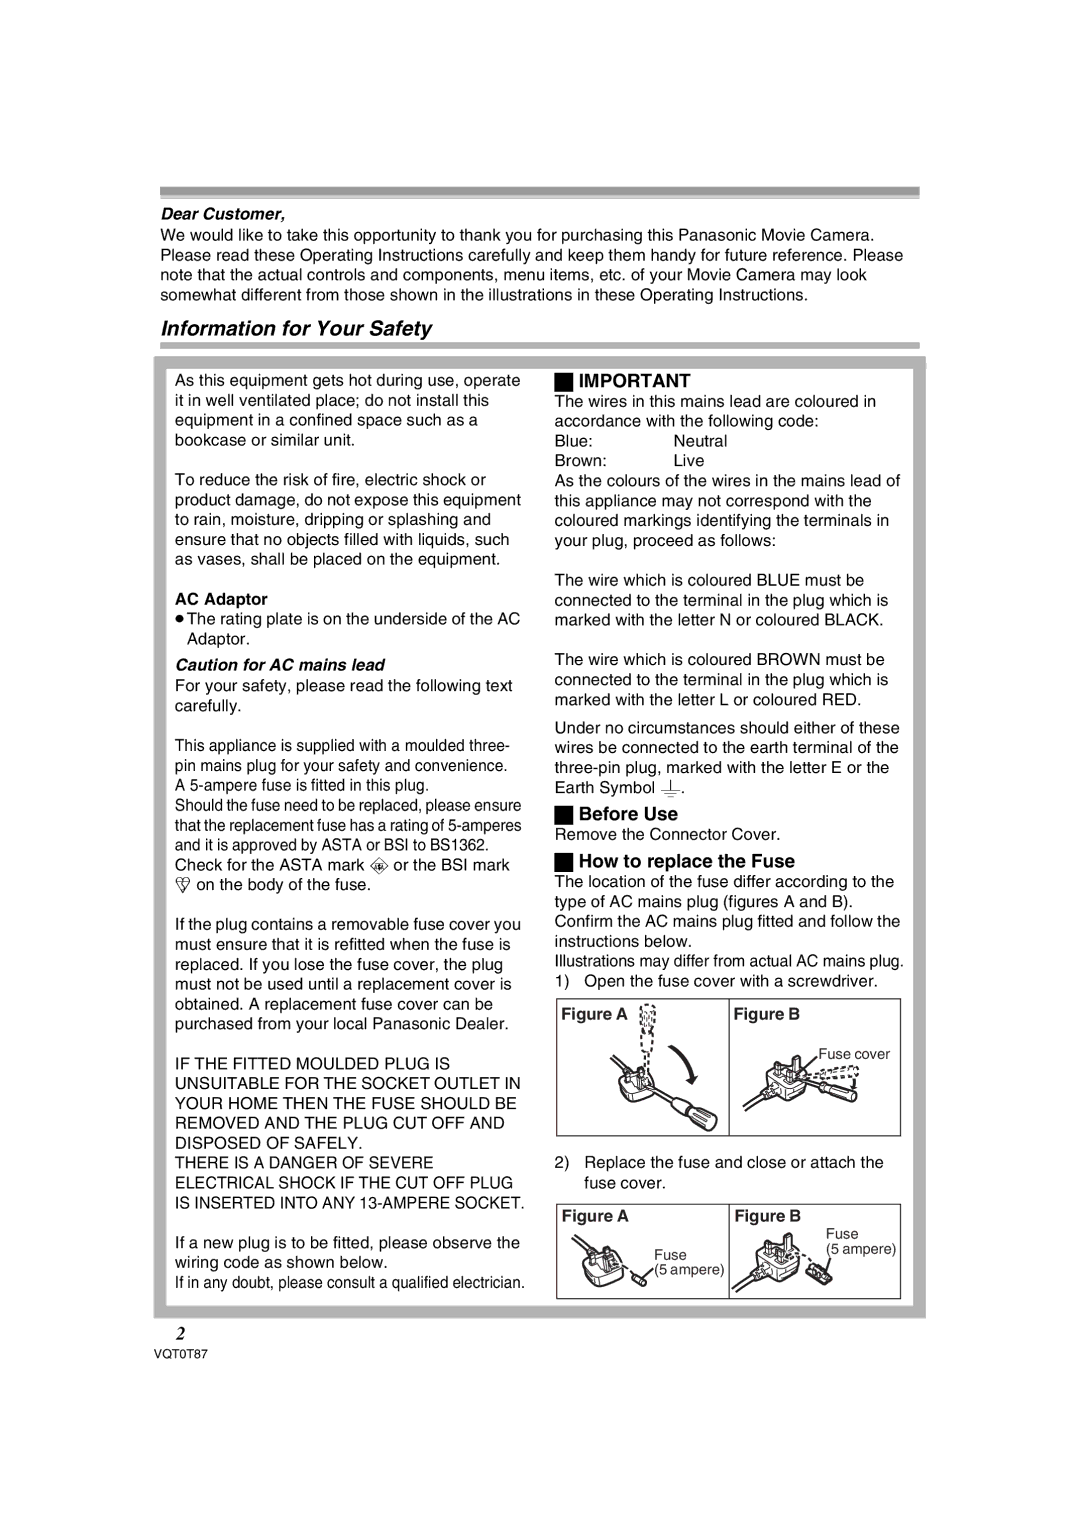 Panasonic NV-GS180EB operating instructions Information for Your Safety, Before Use, How to replace the Fuse, AC Adaptor 